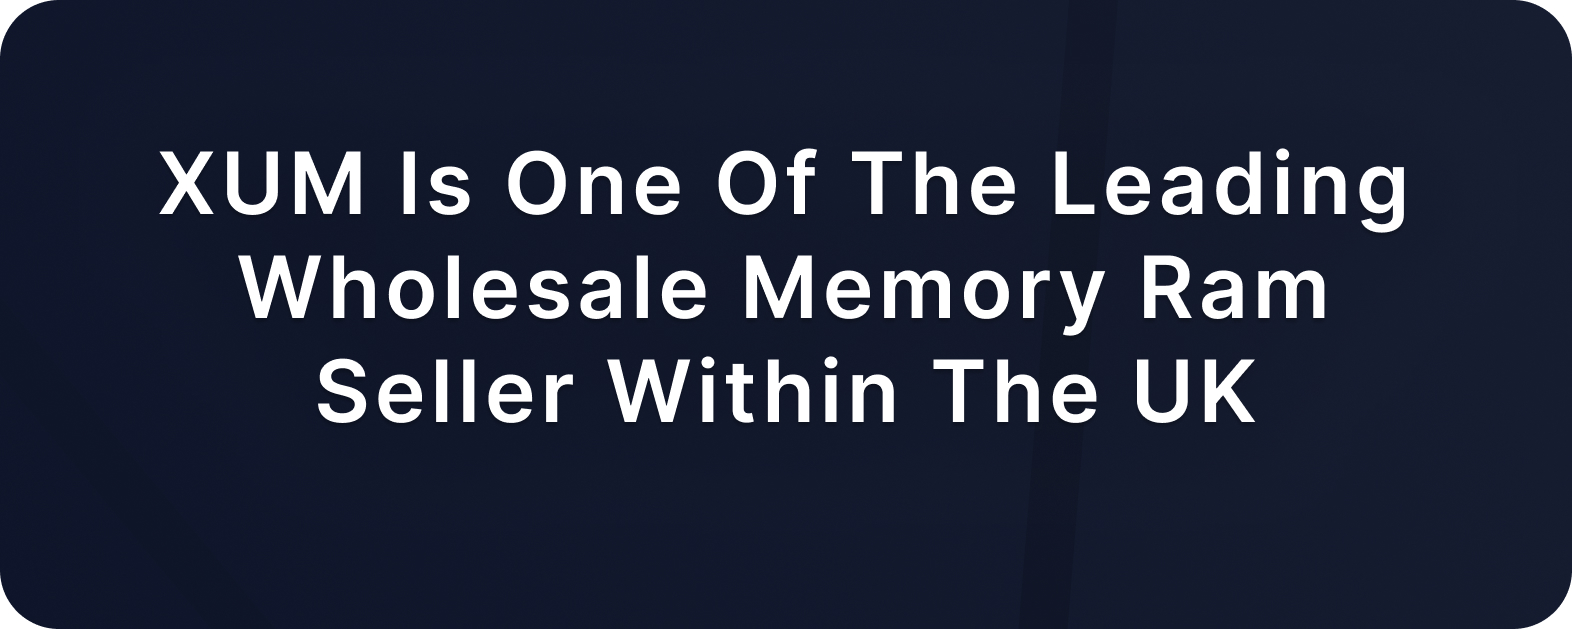 XUM is one of the leading wholesale memory ram seller within the UK